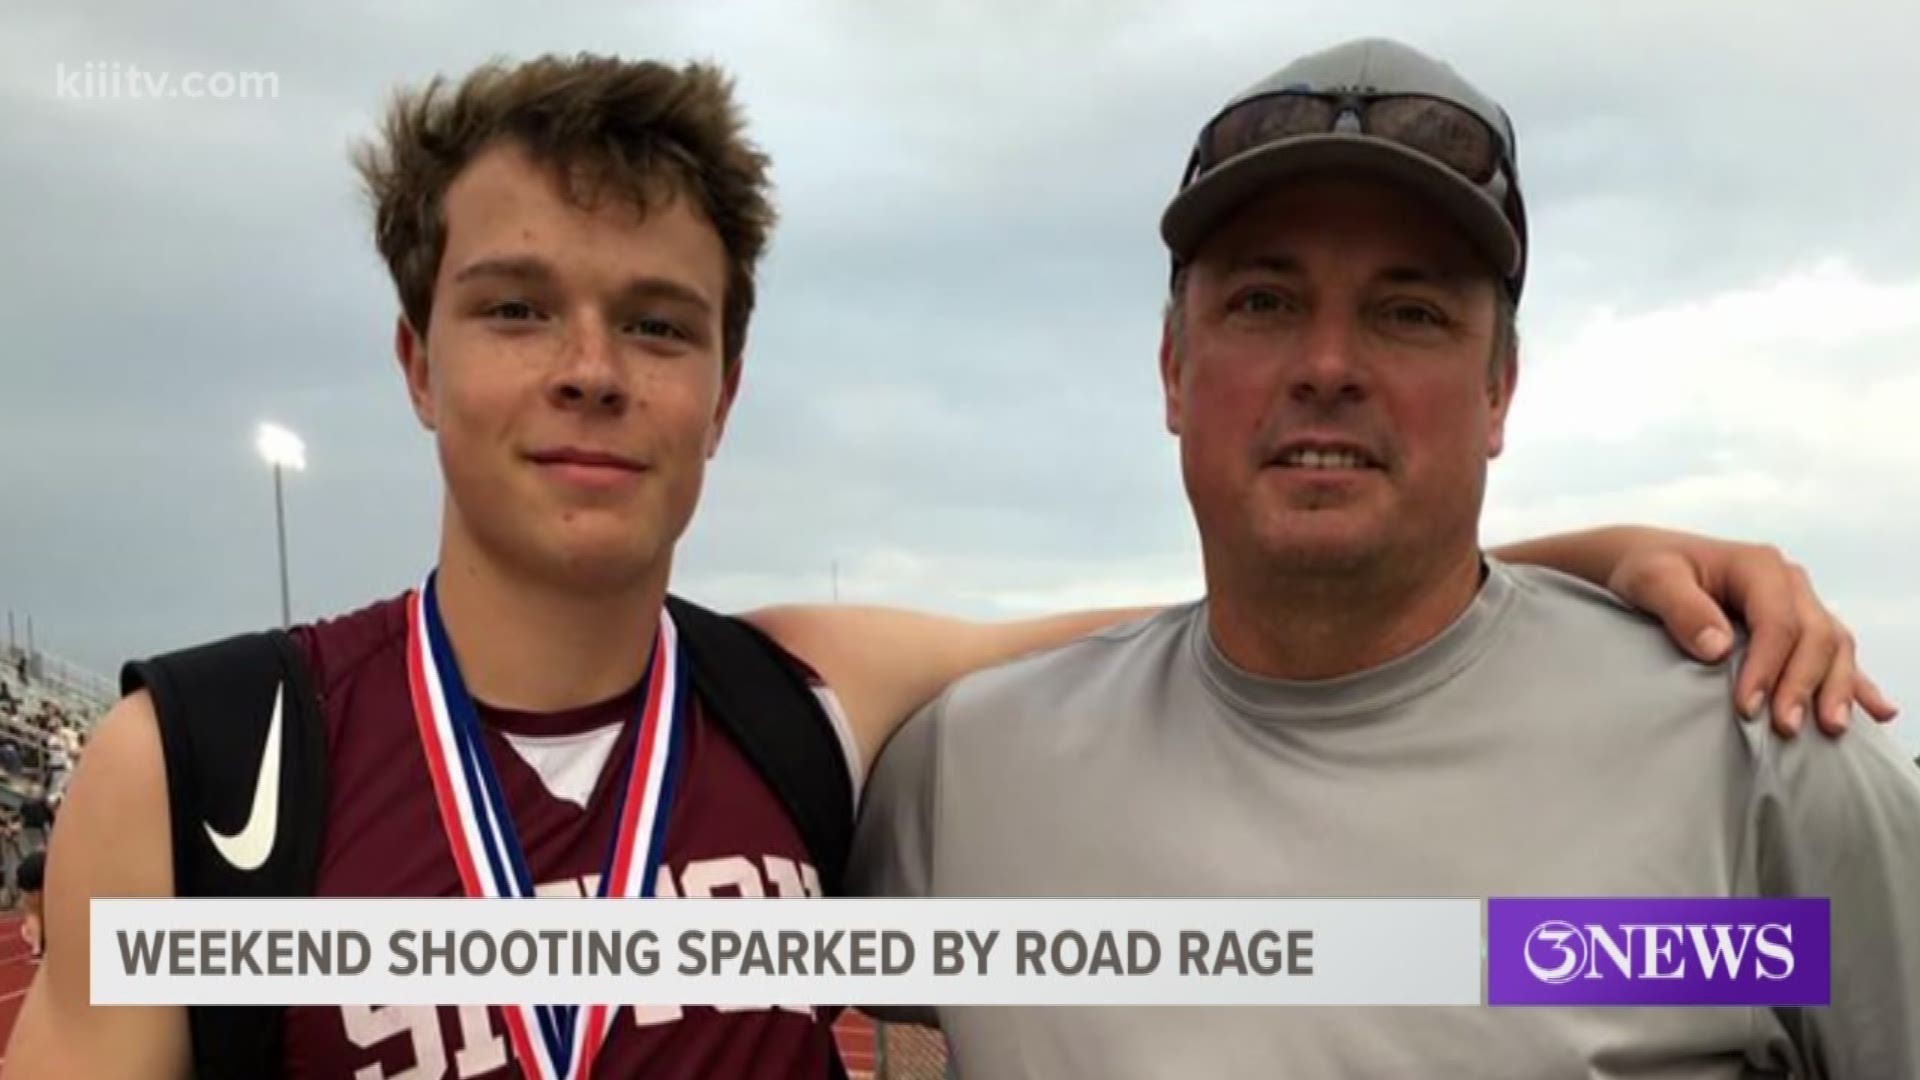 A community is grieving over the death of a beloved teenage athlete at Sinton High School was gunned down, and his father wounded during what law officers said was a road rage incident on County Road 732.